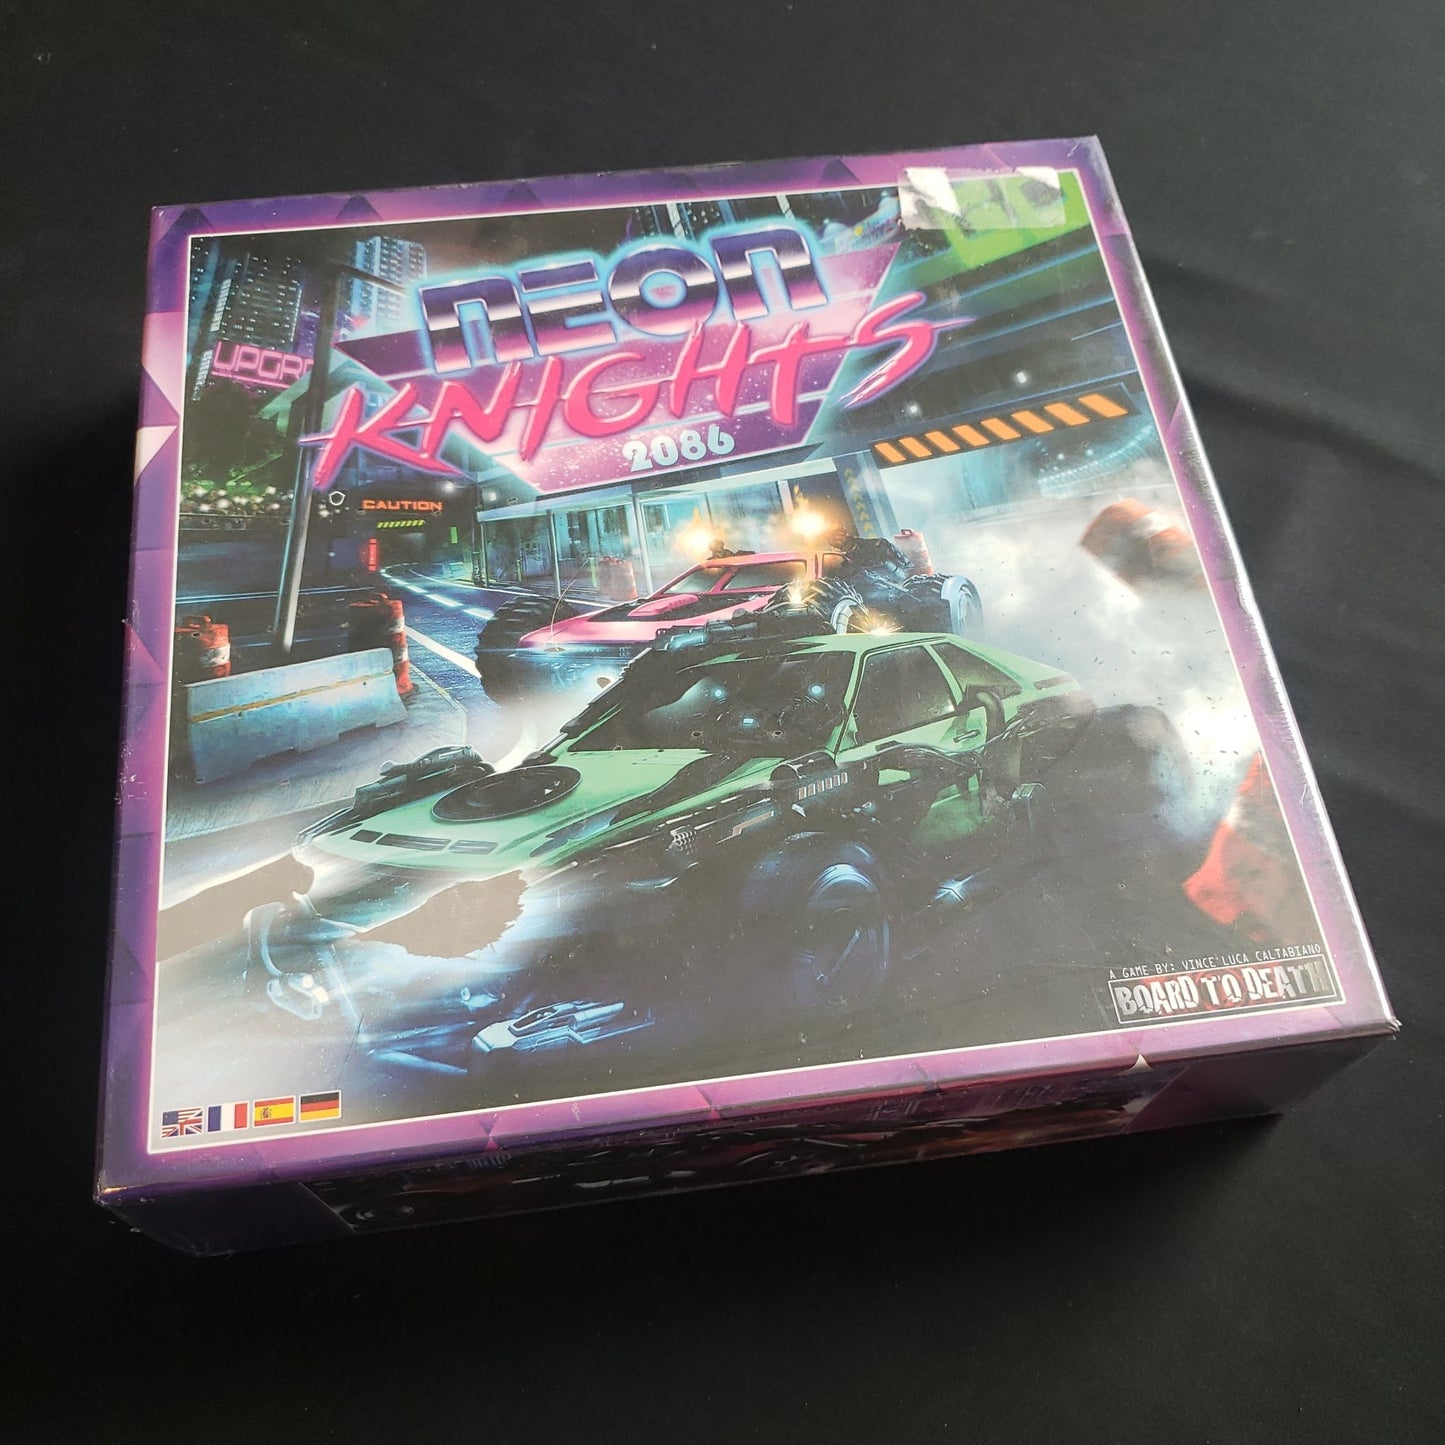 Neon Knights 2086 board game - front cover of box